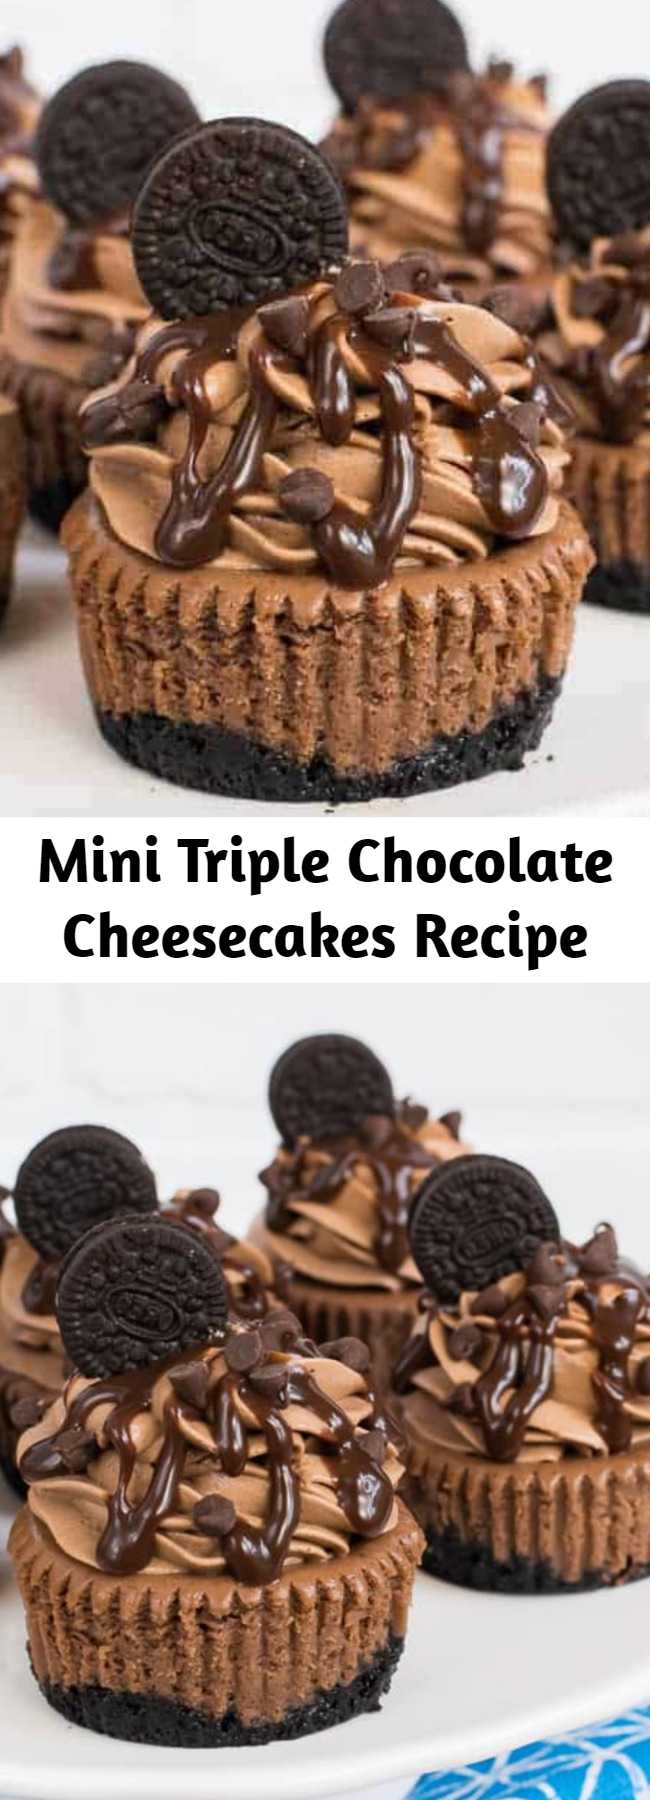 Mini Triple Chocolate Cheesecakes Recipe - Three times the chocolate makes these Mini Triple Chocolate Cheesecakes a dream dessert for the chocolate lovers in your life.